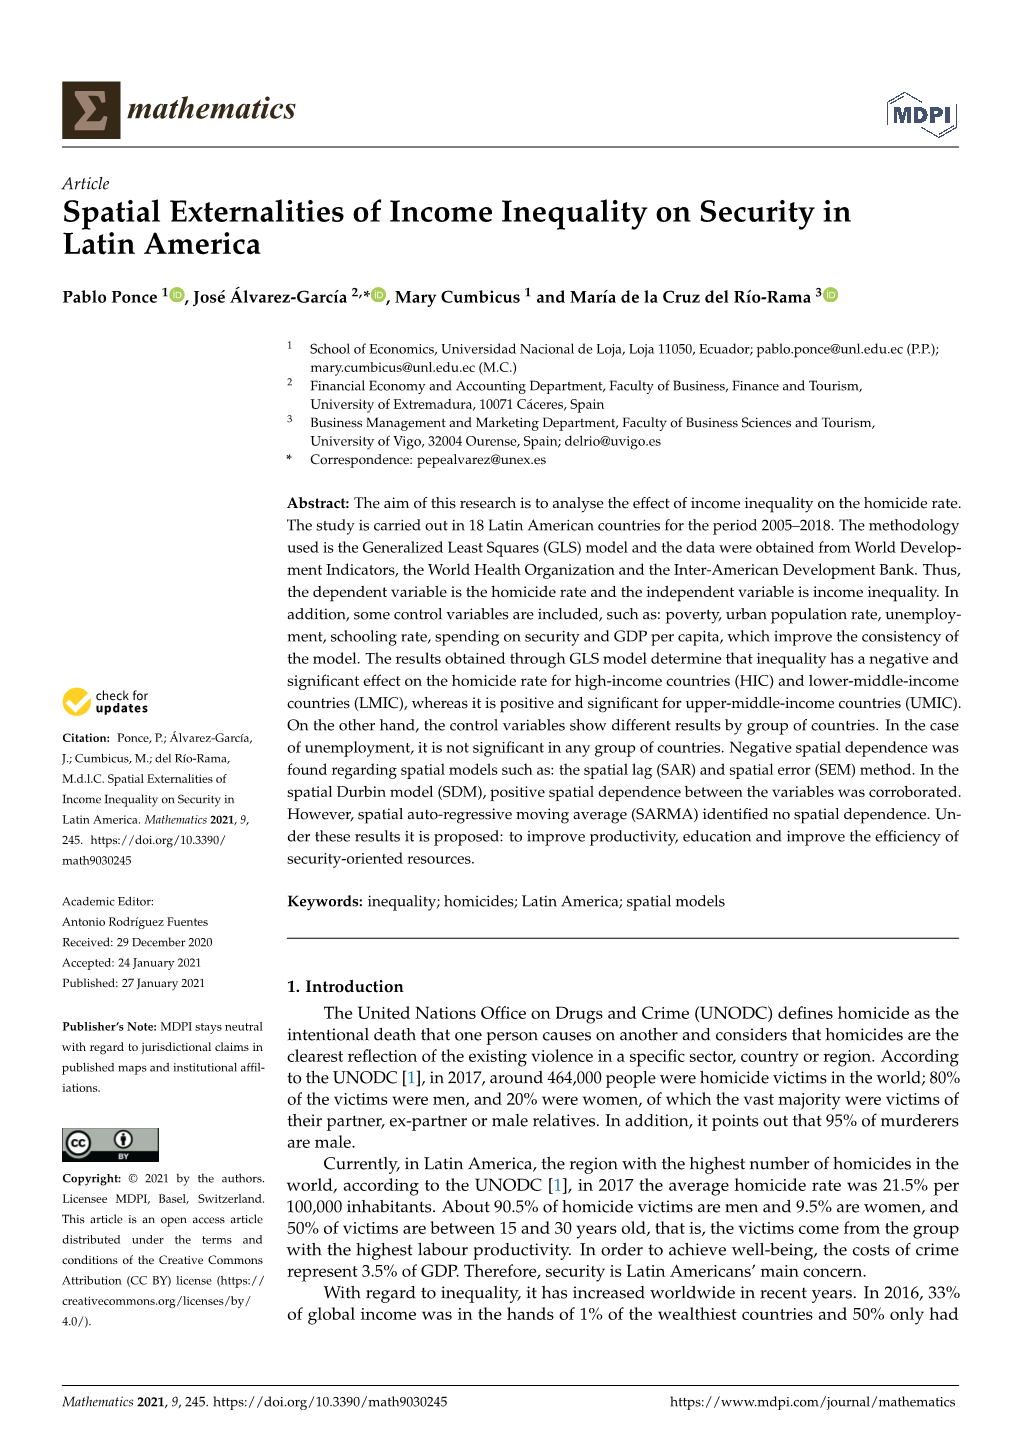 Spatial Externalities of Income Inequality on Security in Latin America